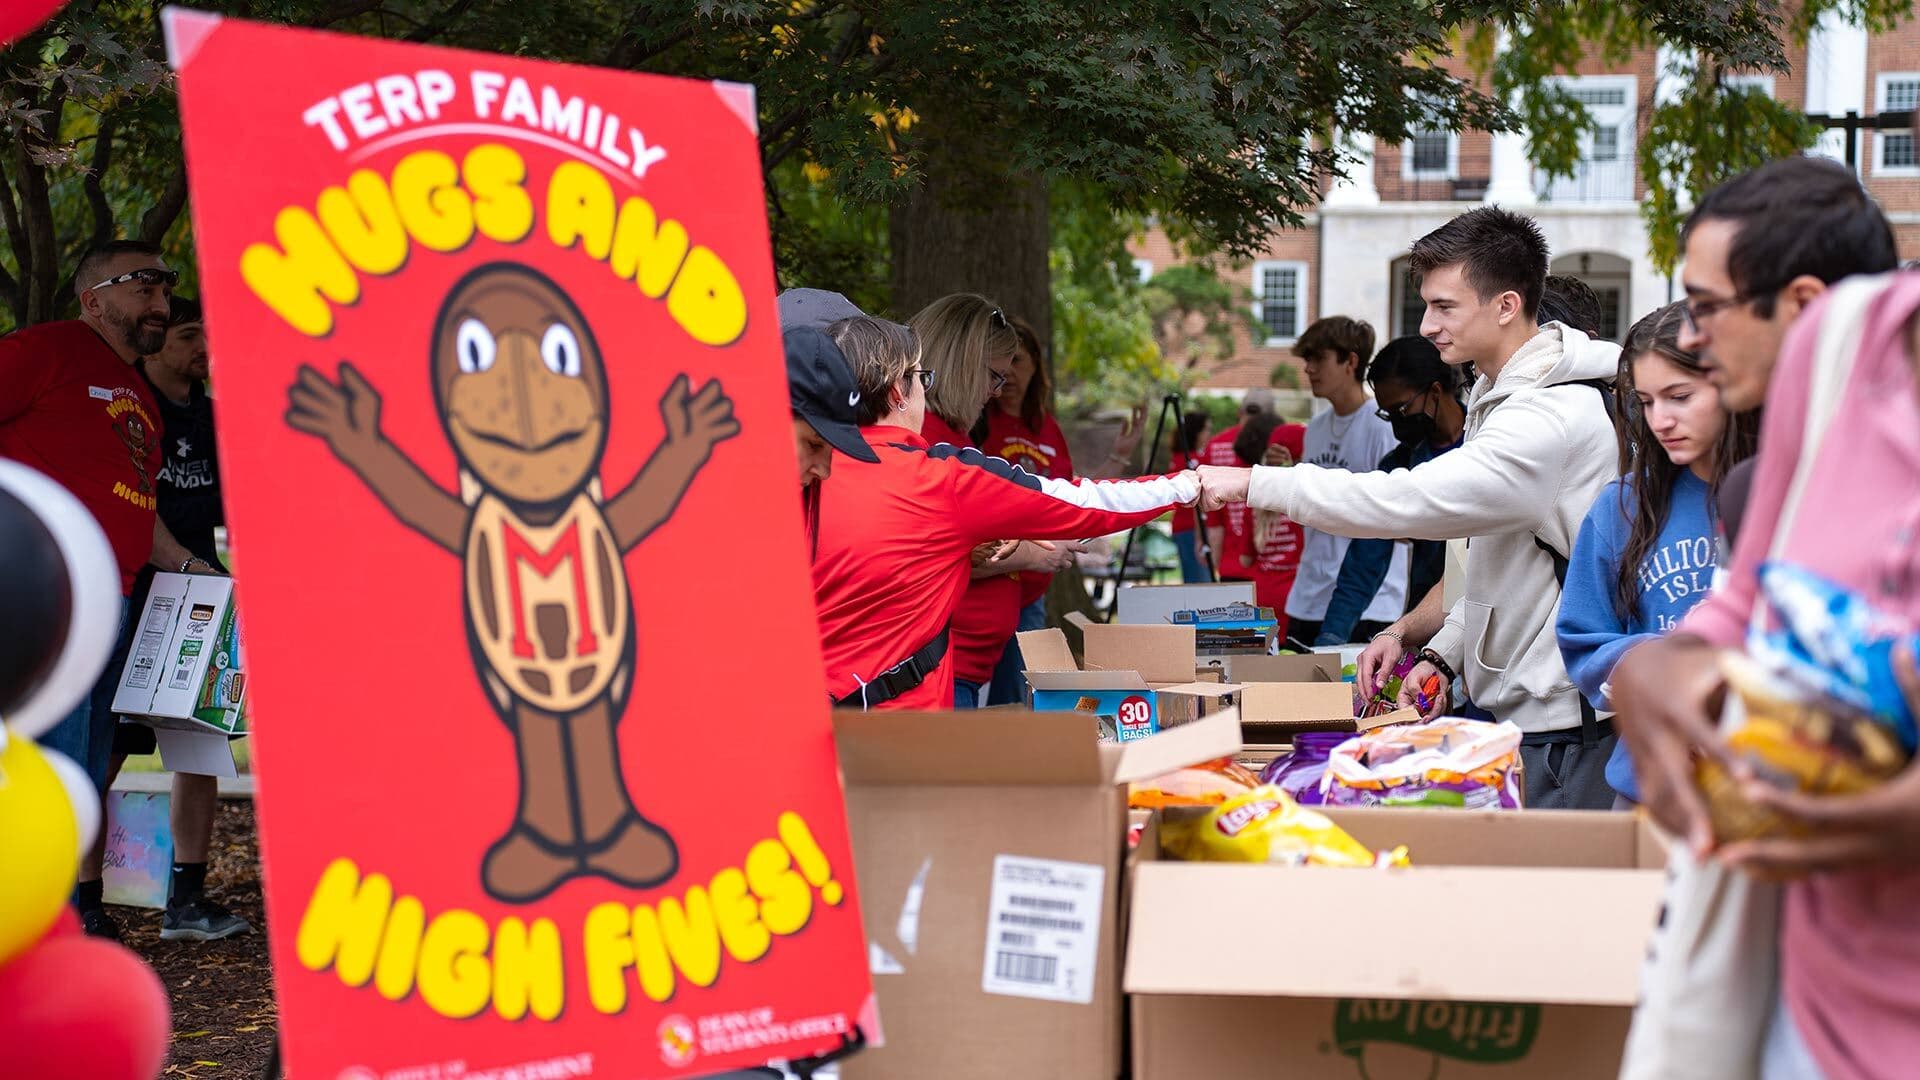 Red sign that says "Terp Family: Hugs and High Fives" with an image of Testudo in front of a table full of snacks